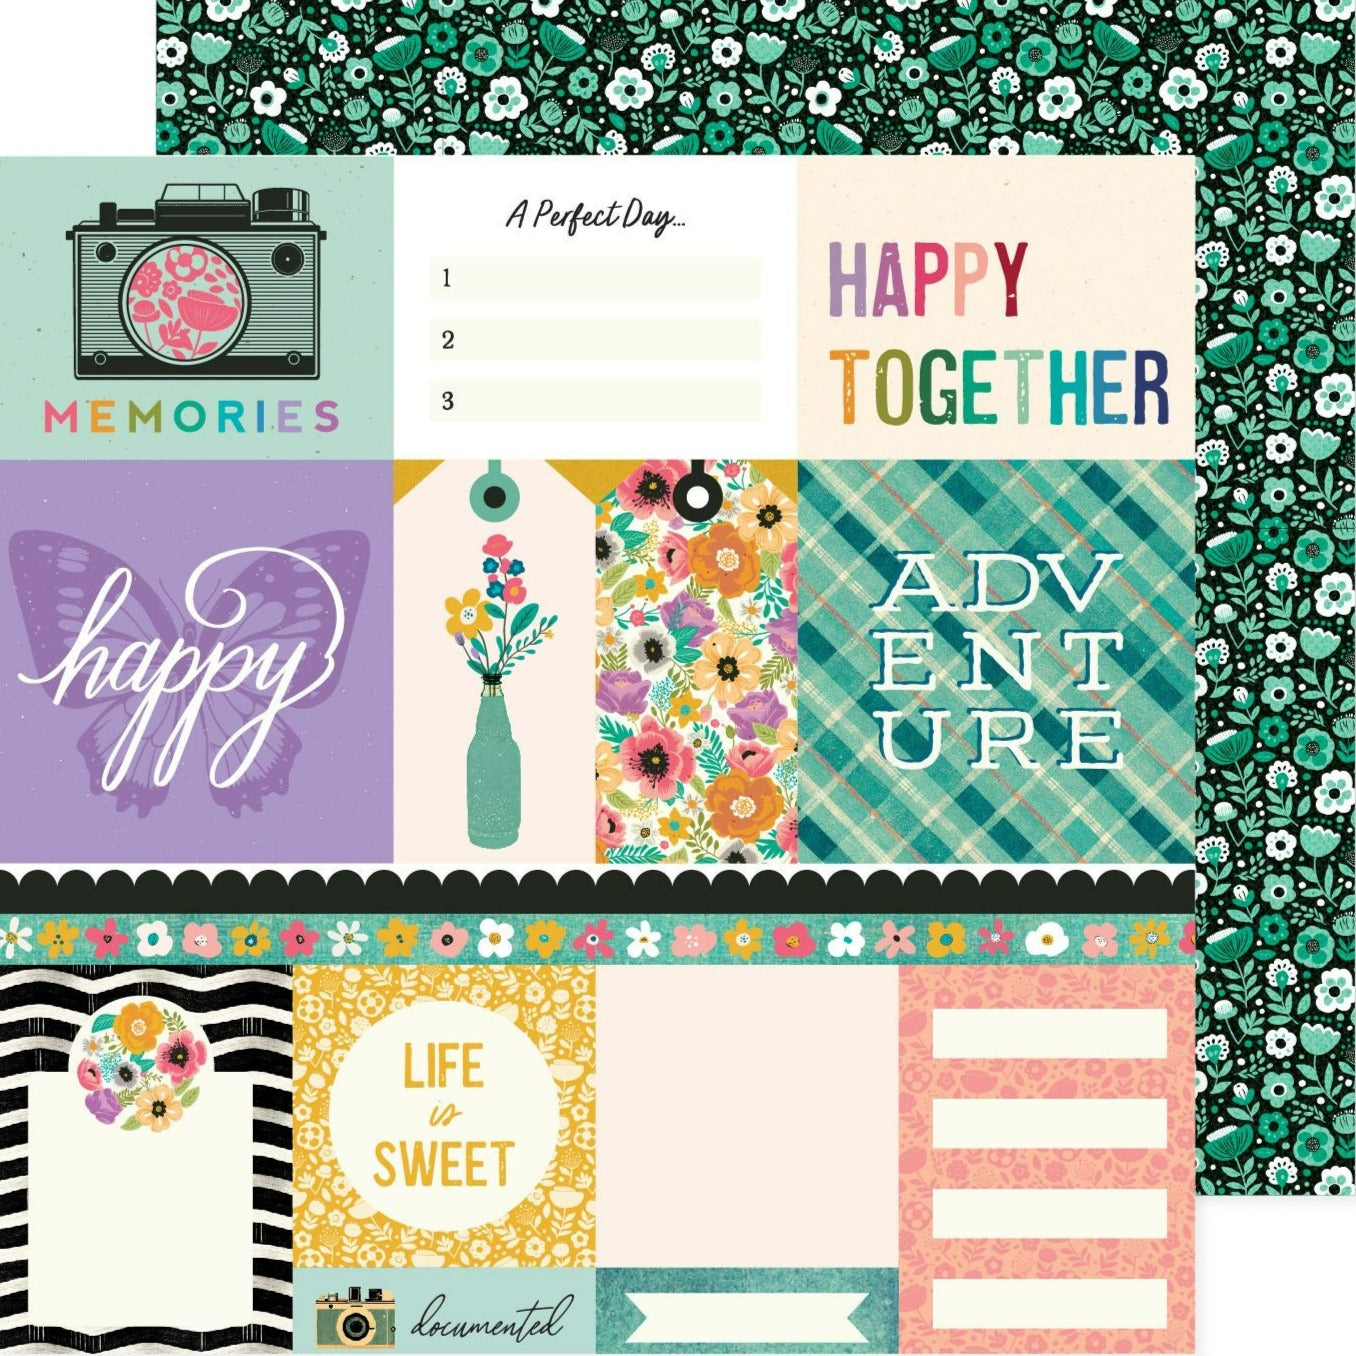 12x12 patterned cardstock. (Side A - fun, everyday journaling cards, Side B - green and white floral pattern on a black background) - Archival-safe and acid-free from American Crafts